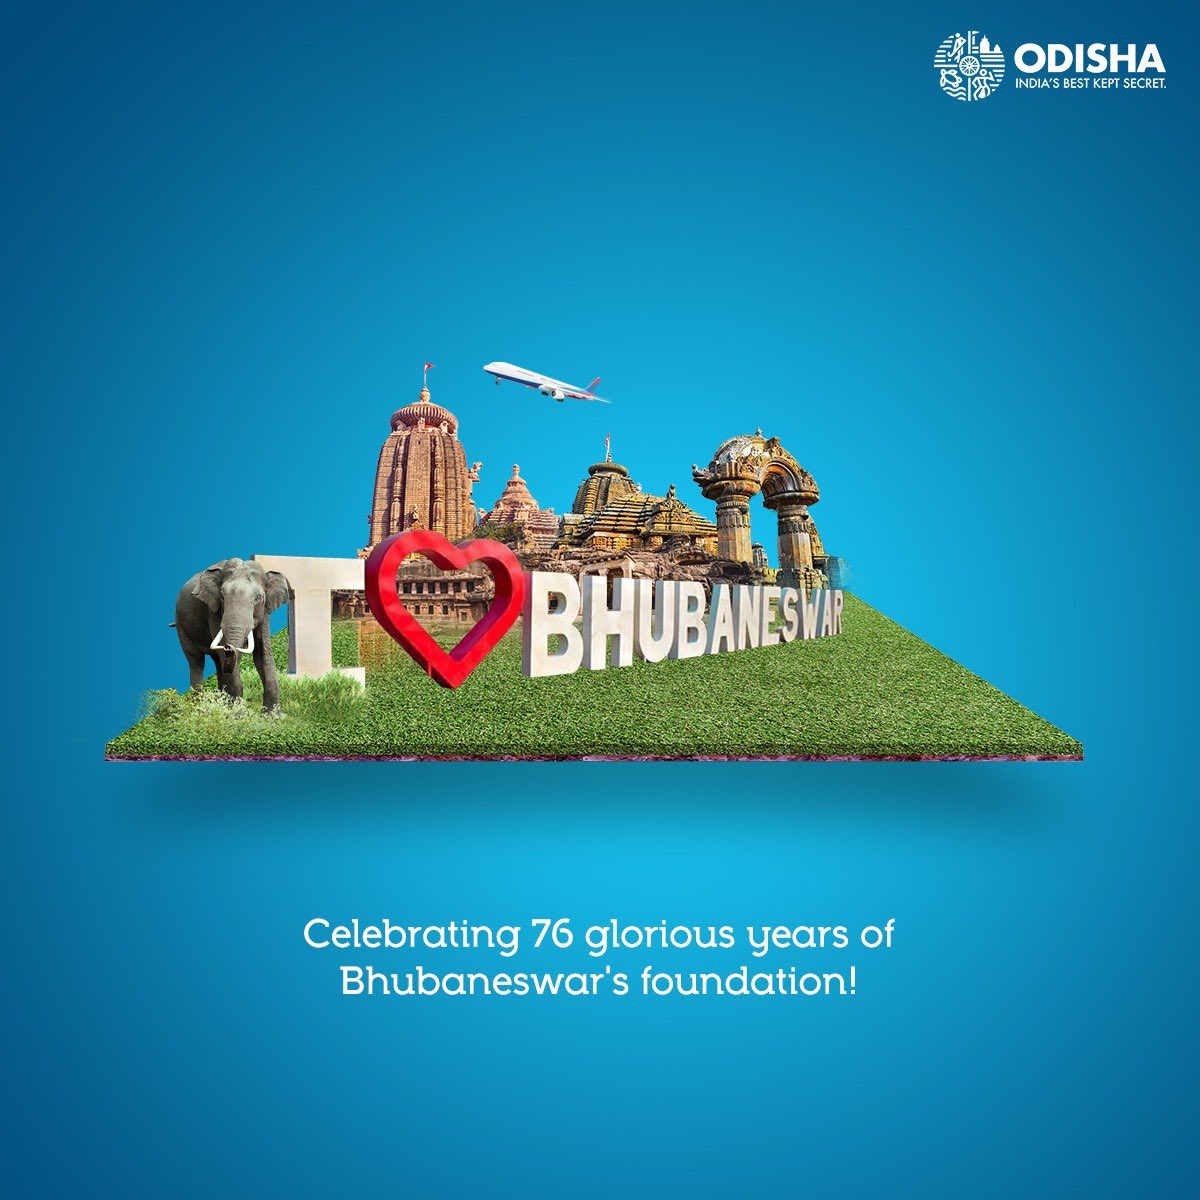 Warm greetings to all citizens of #Bhubaneswar on its Foundation Day. From #TempleCity to #SmartCity, #Bhubaneswar has also emerged as #Sports Hub of India. On #BhubaneswarFoundationDay, let’s pledge to preserve its monuments, heritage & keep it clean.